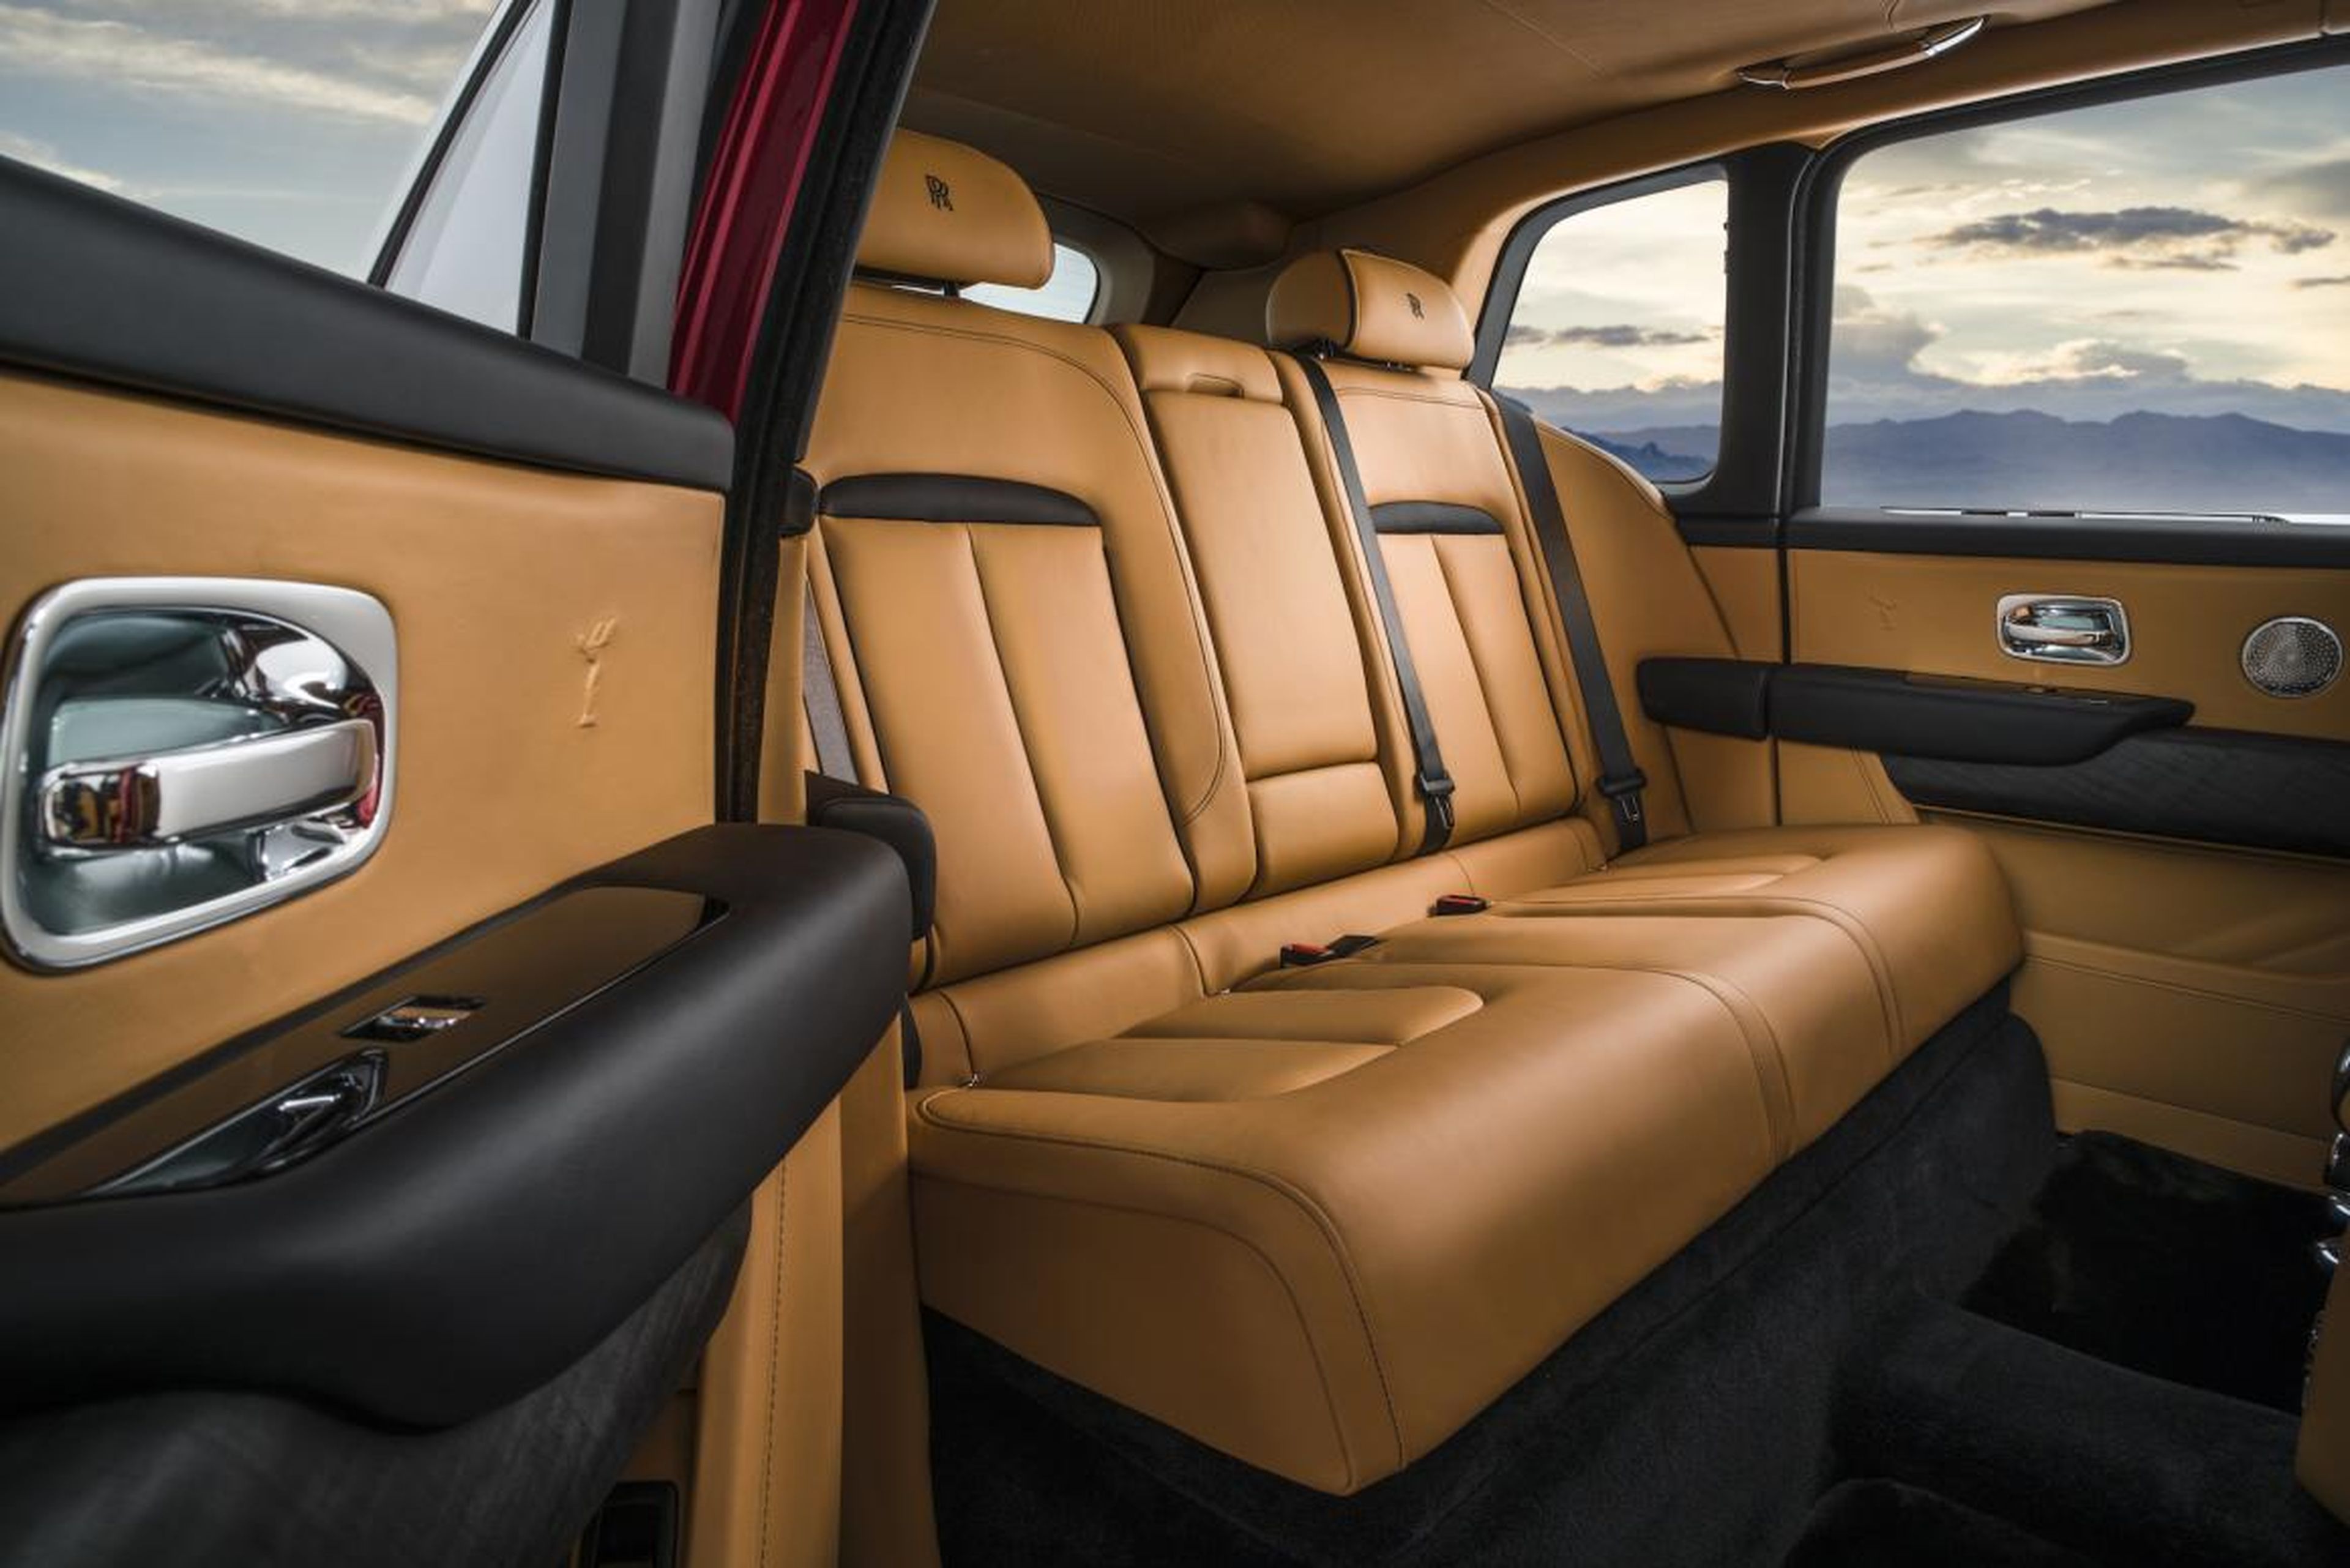 Open up the rear coach door and you'll find traditional Rolls-Royce luxury.